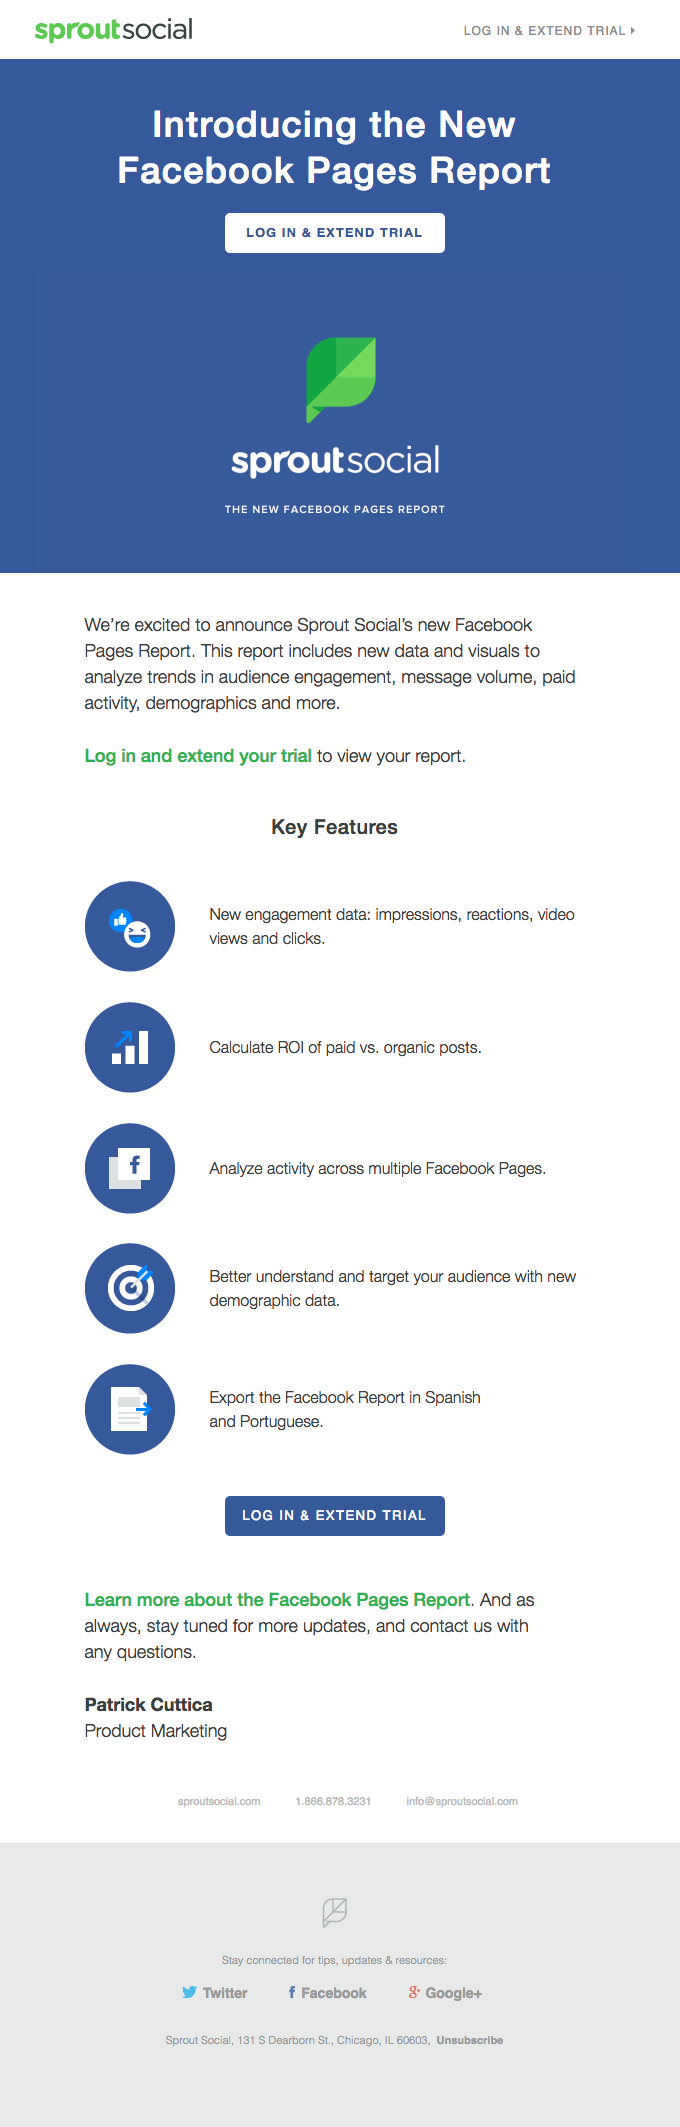 new-feature-facebook-pages-report-8